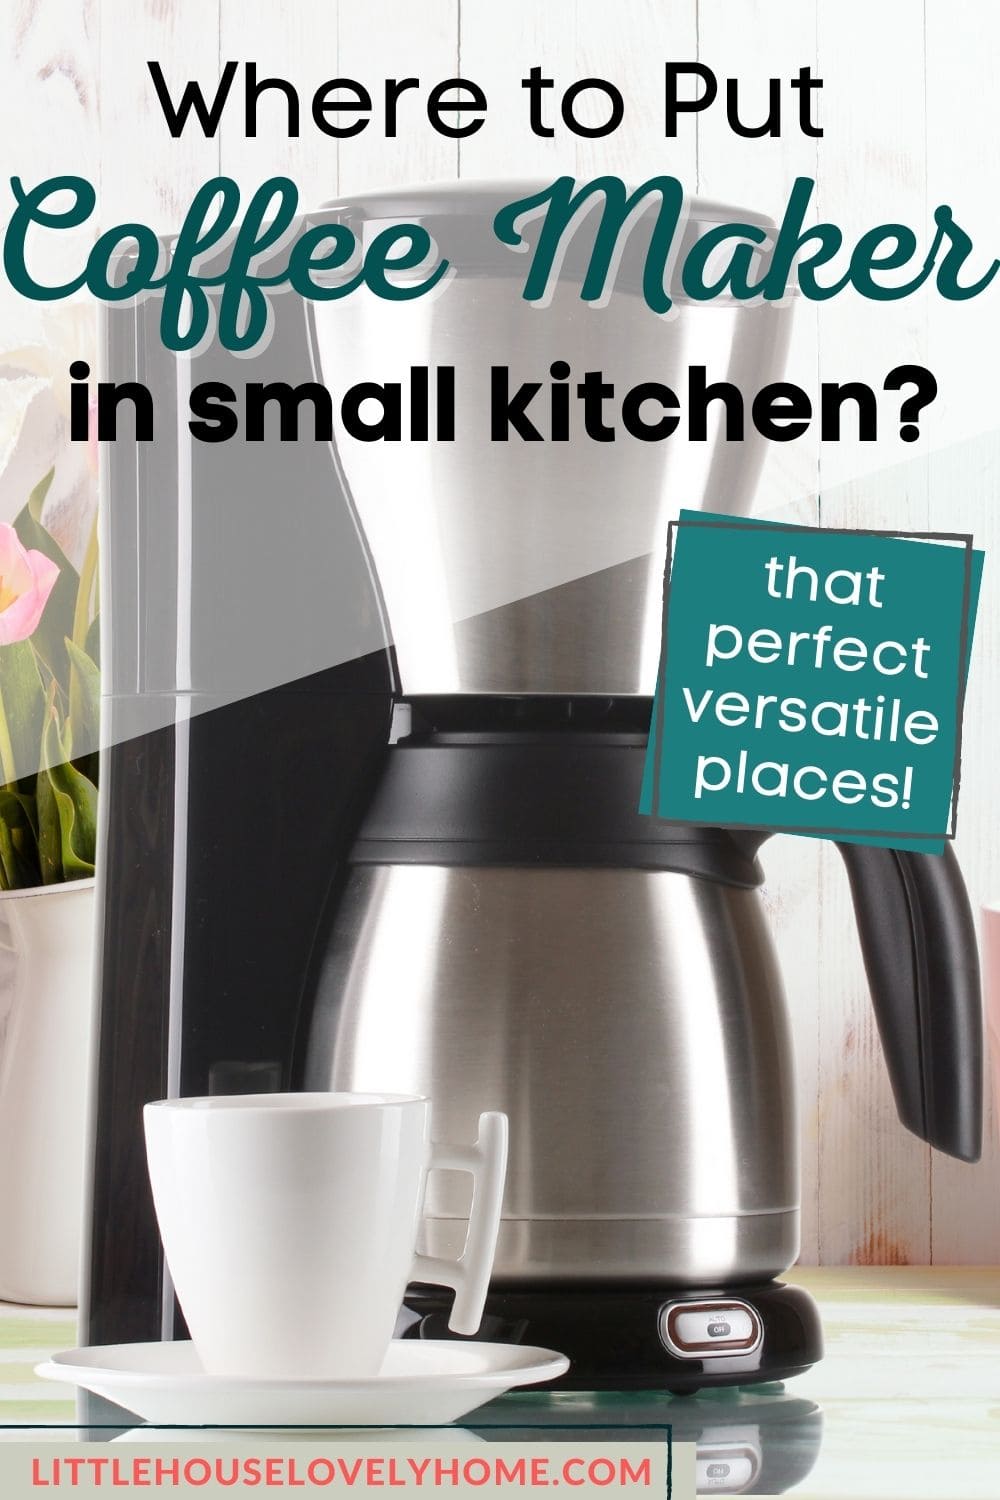 Image of a coffee maker with a cup and saucer beside it and a text overlay that say Where to put coffee maker in small kitchen